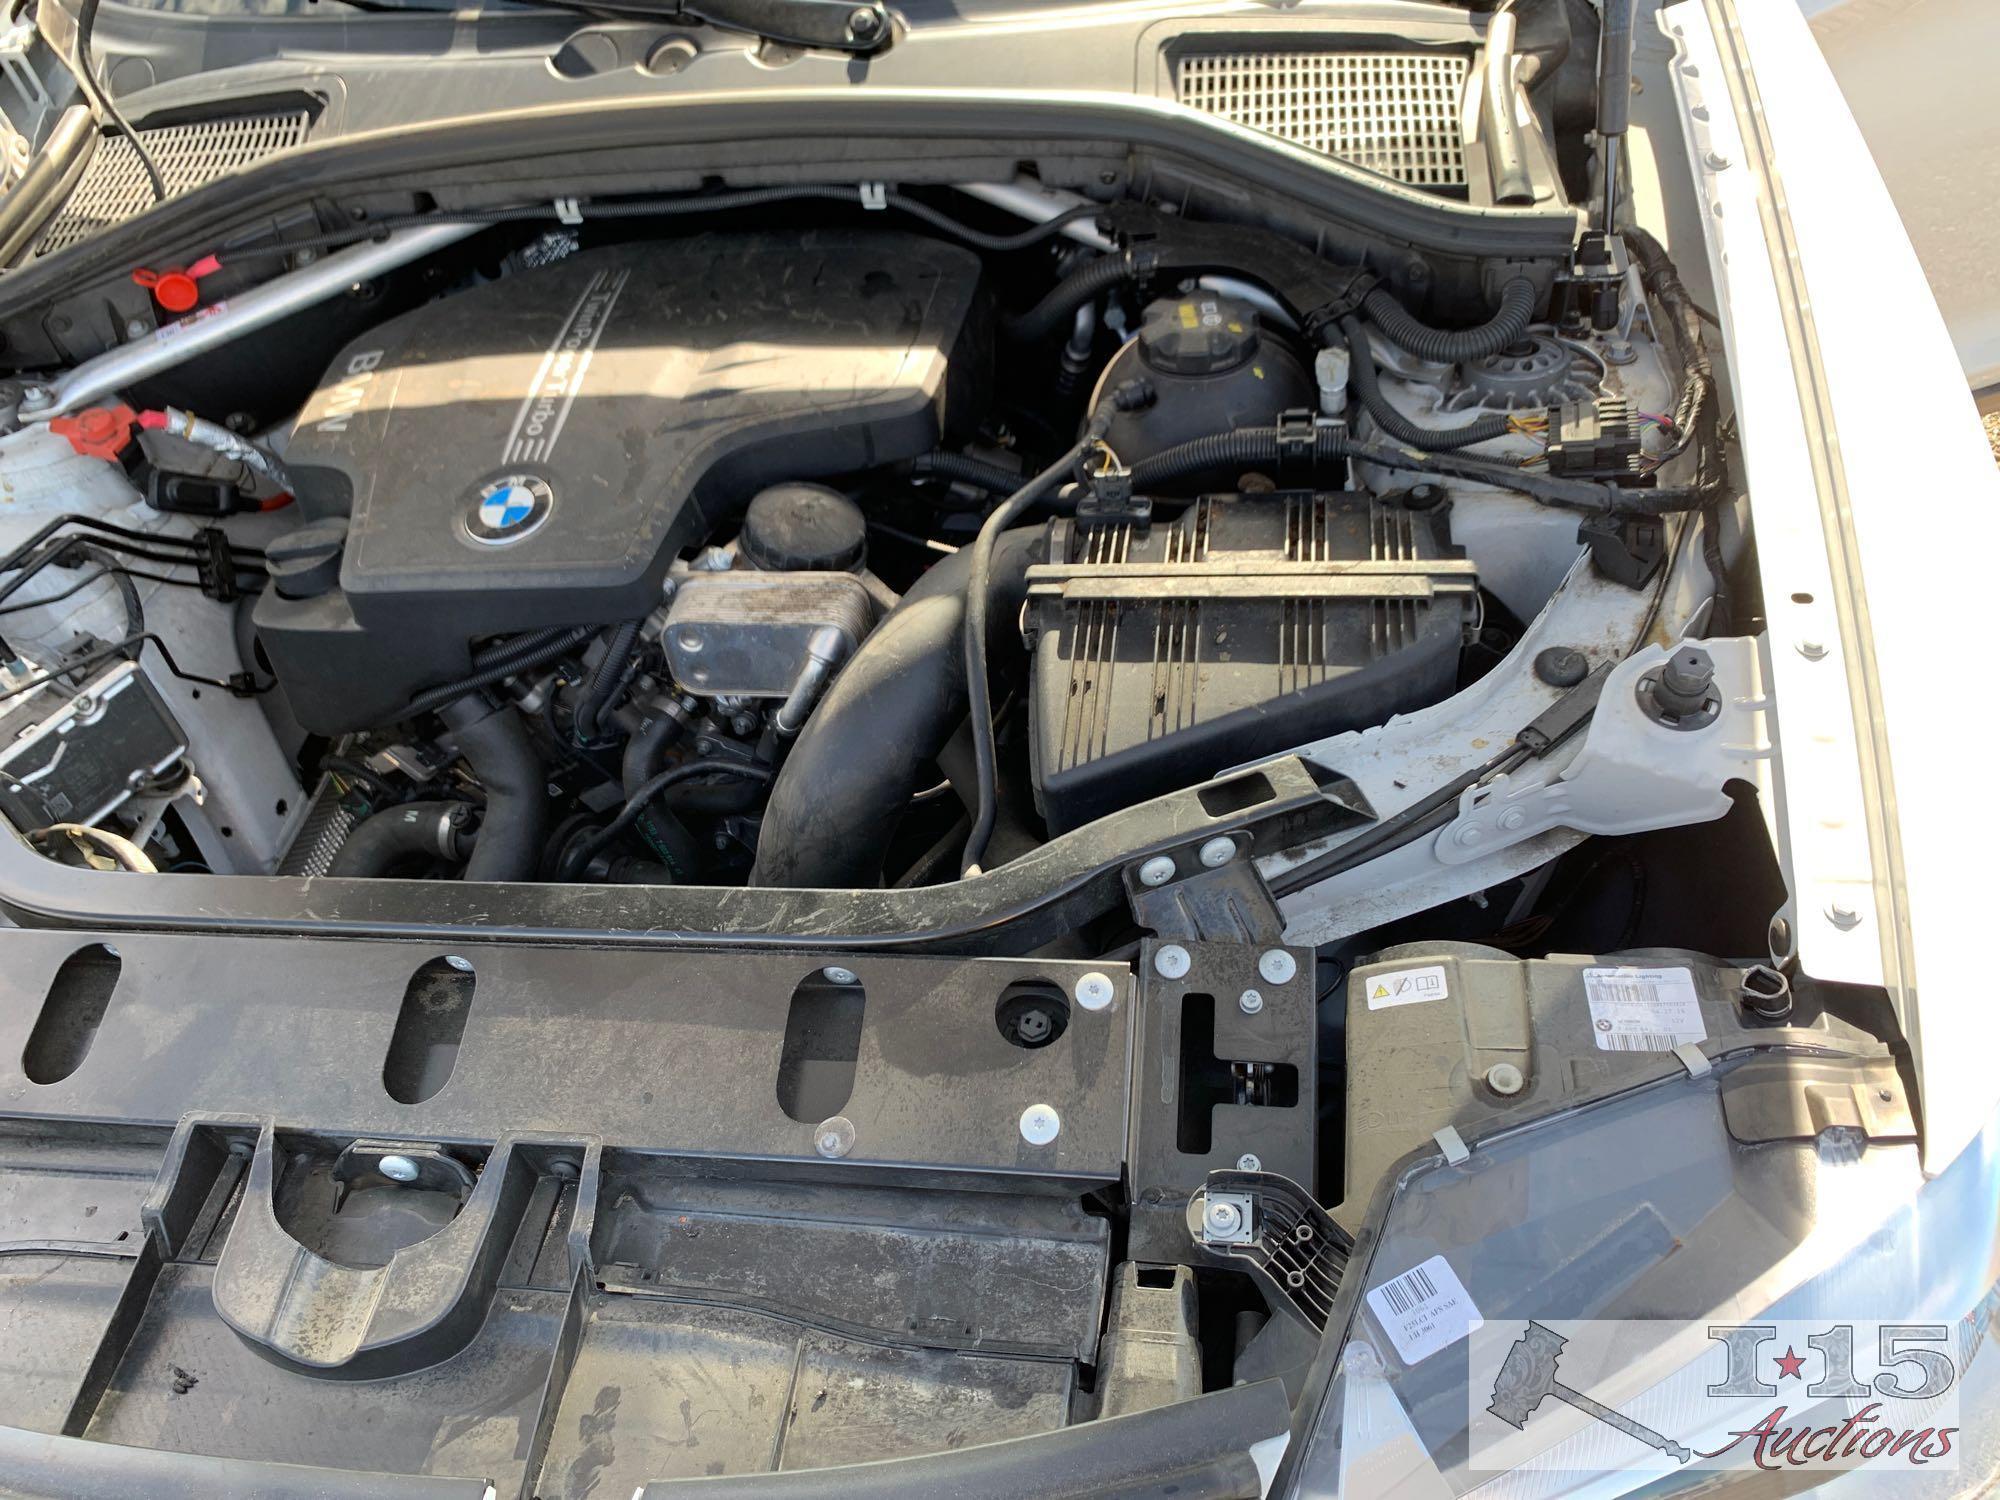 2017 BMW X3, See Video! Current Smog